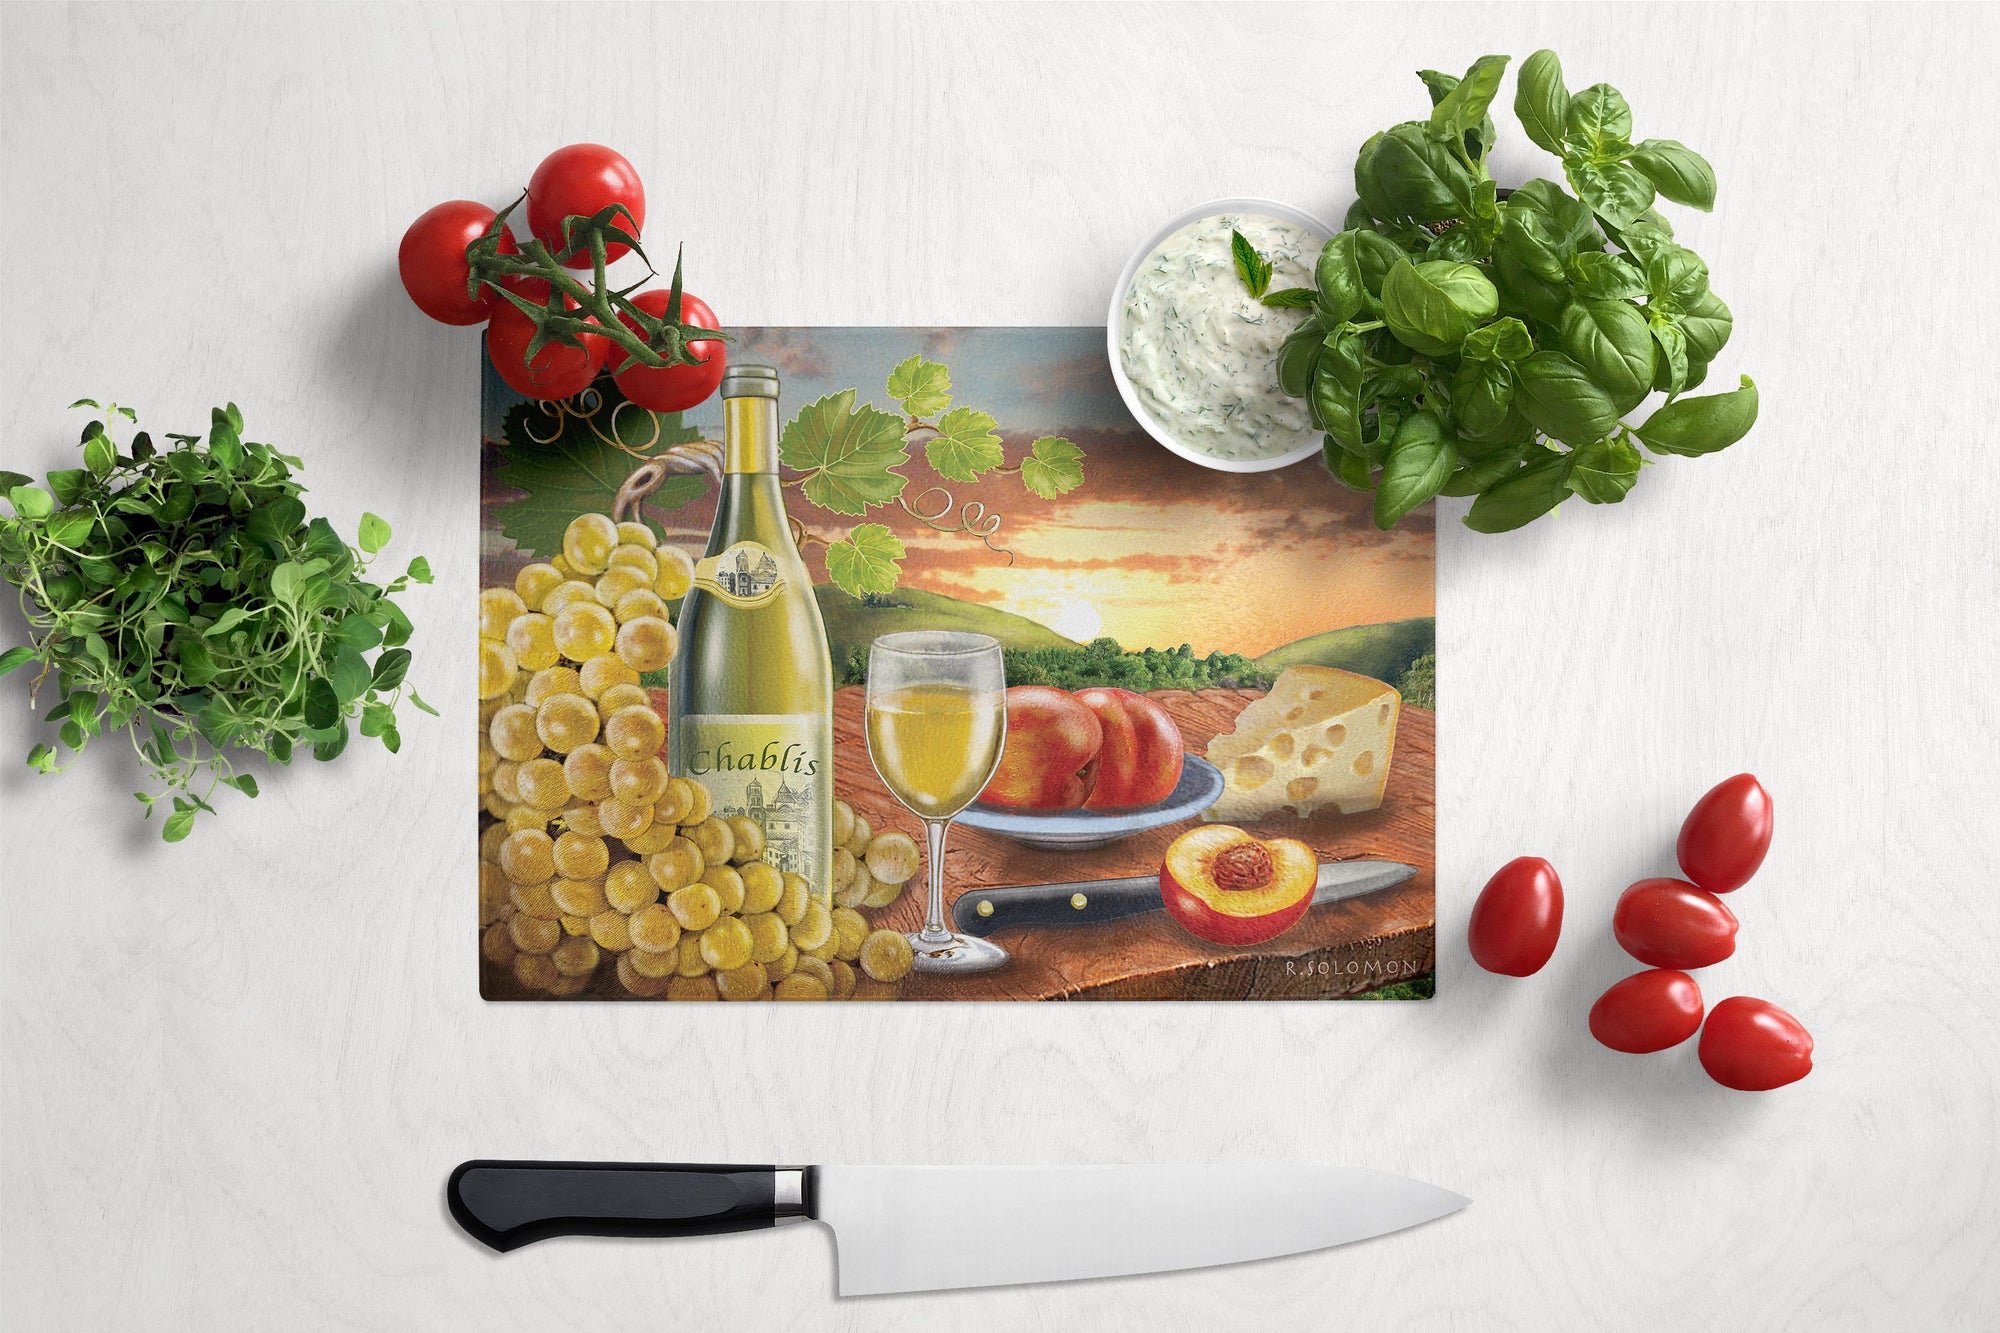 Chablis, Peach, Wine and Cheese Glass Cutting Board Large PRS4028LCB by Caroline's Treasures